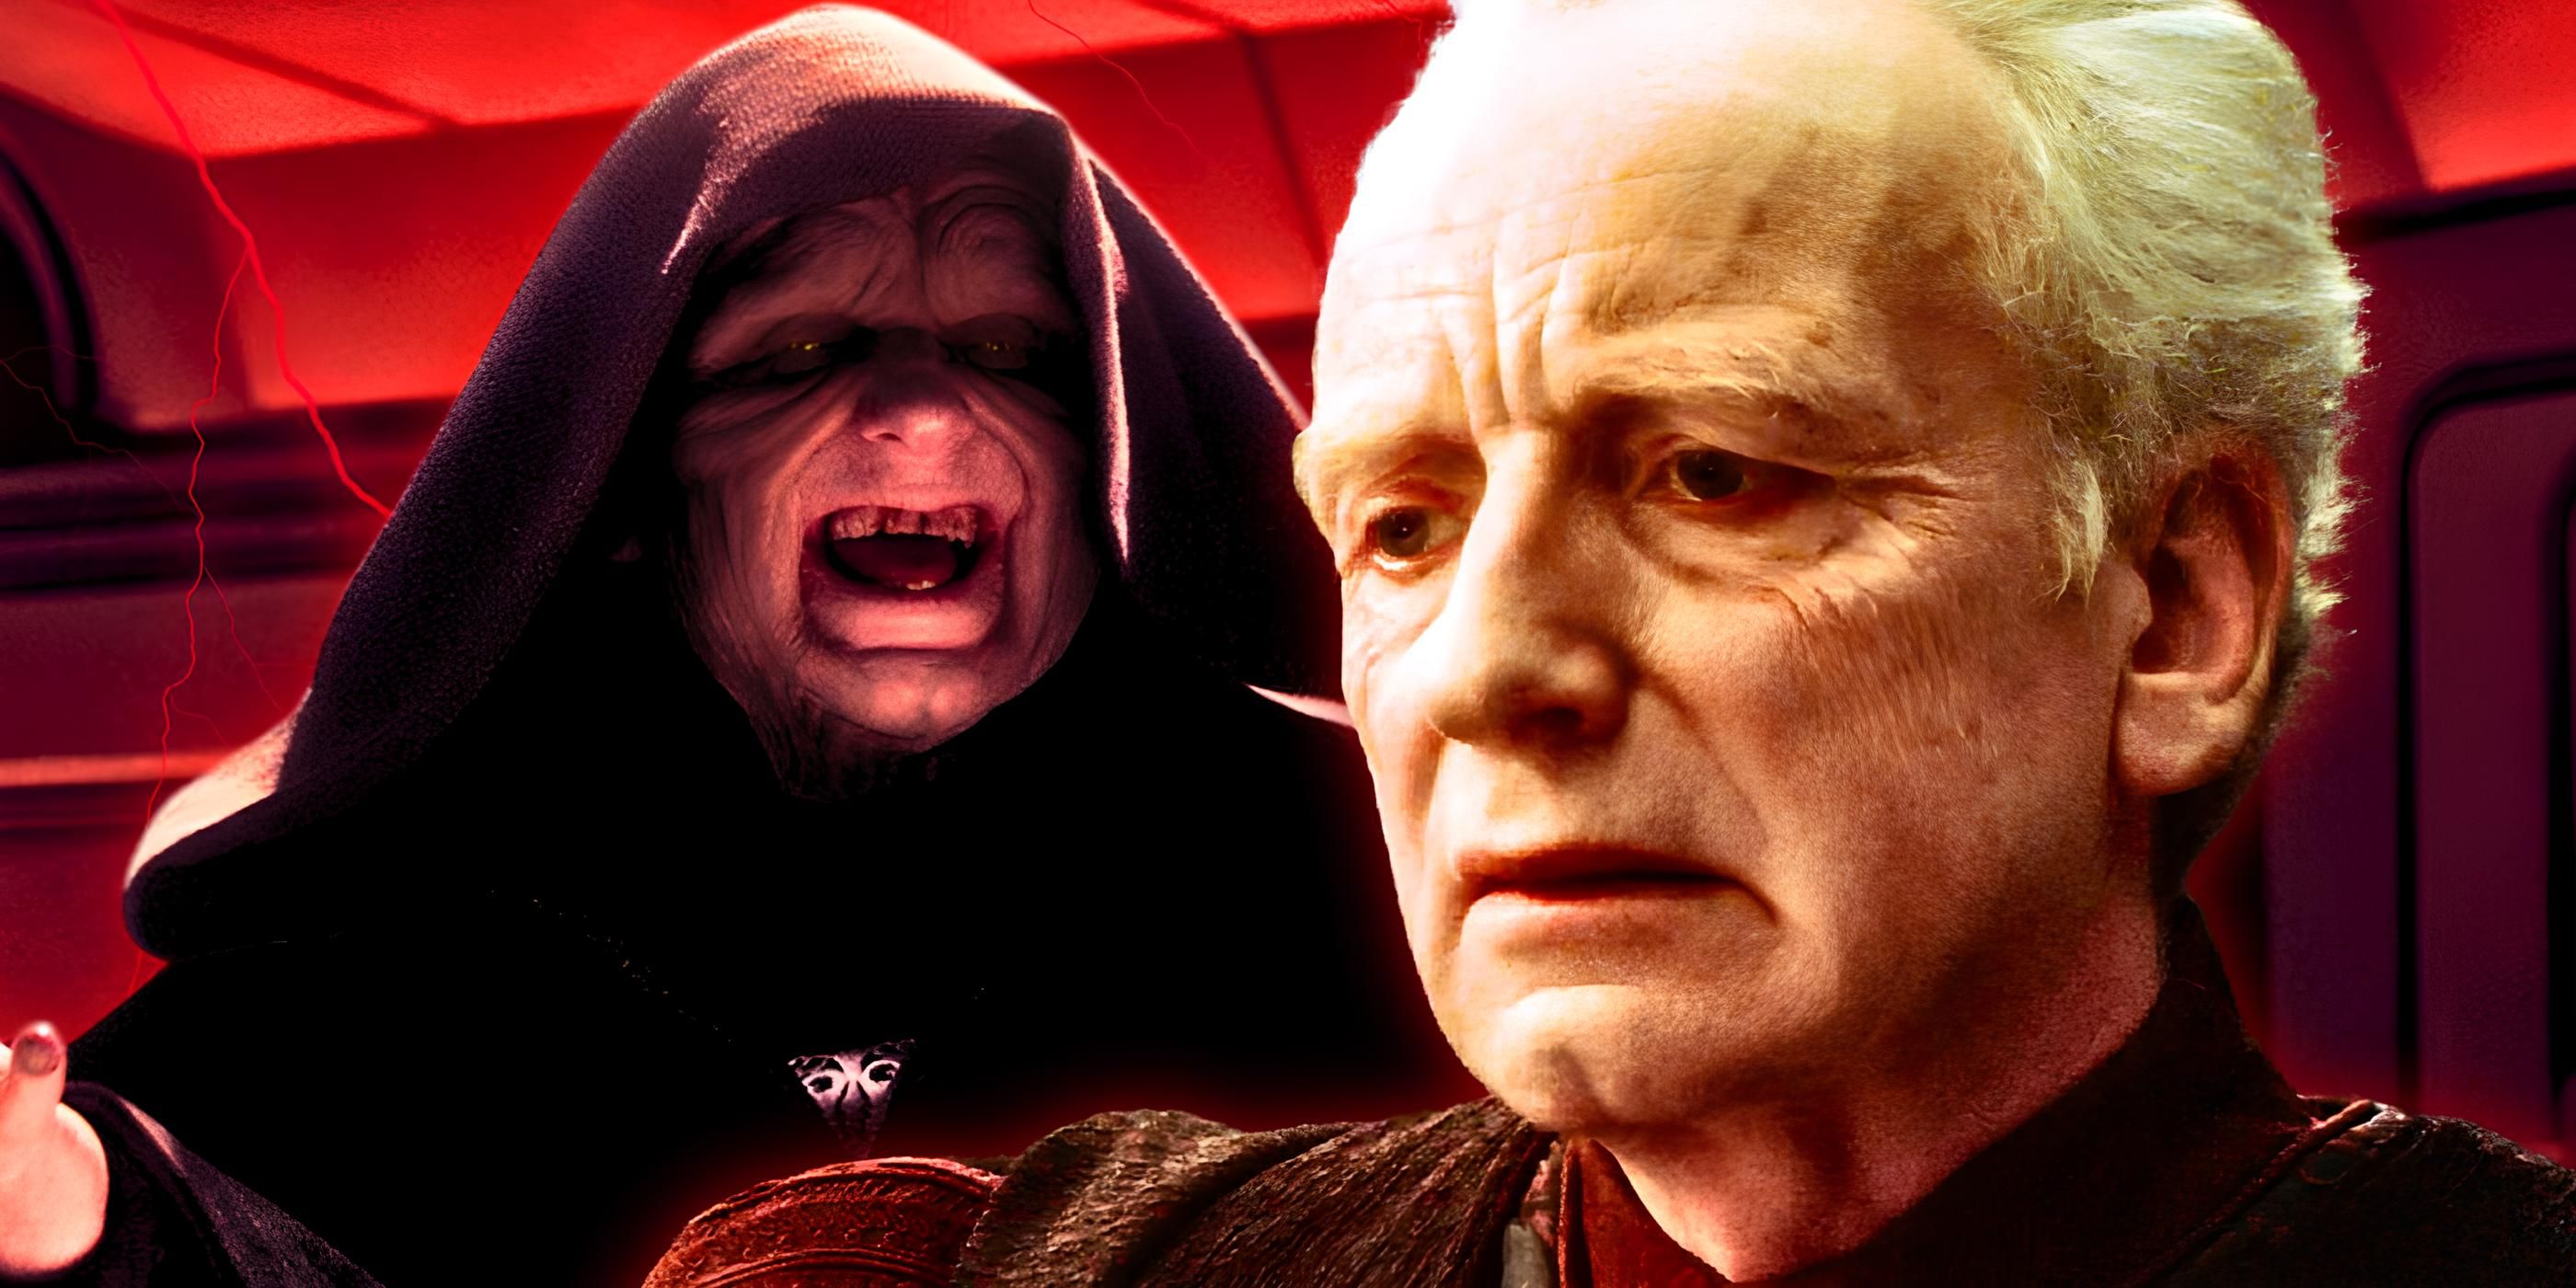 Emperor Palpatine cackling under his hood to the left and Chancellor Palpatine looking upset to the right in a combined image